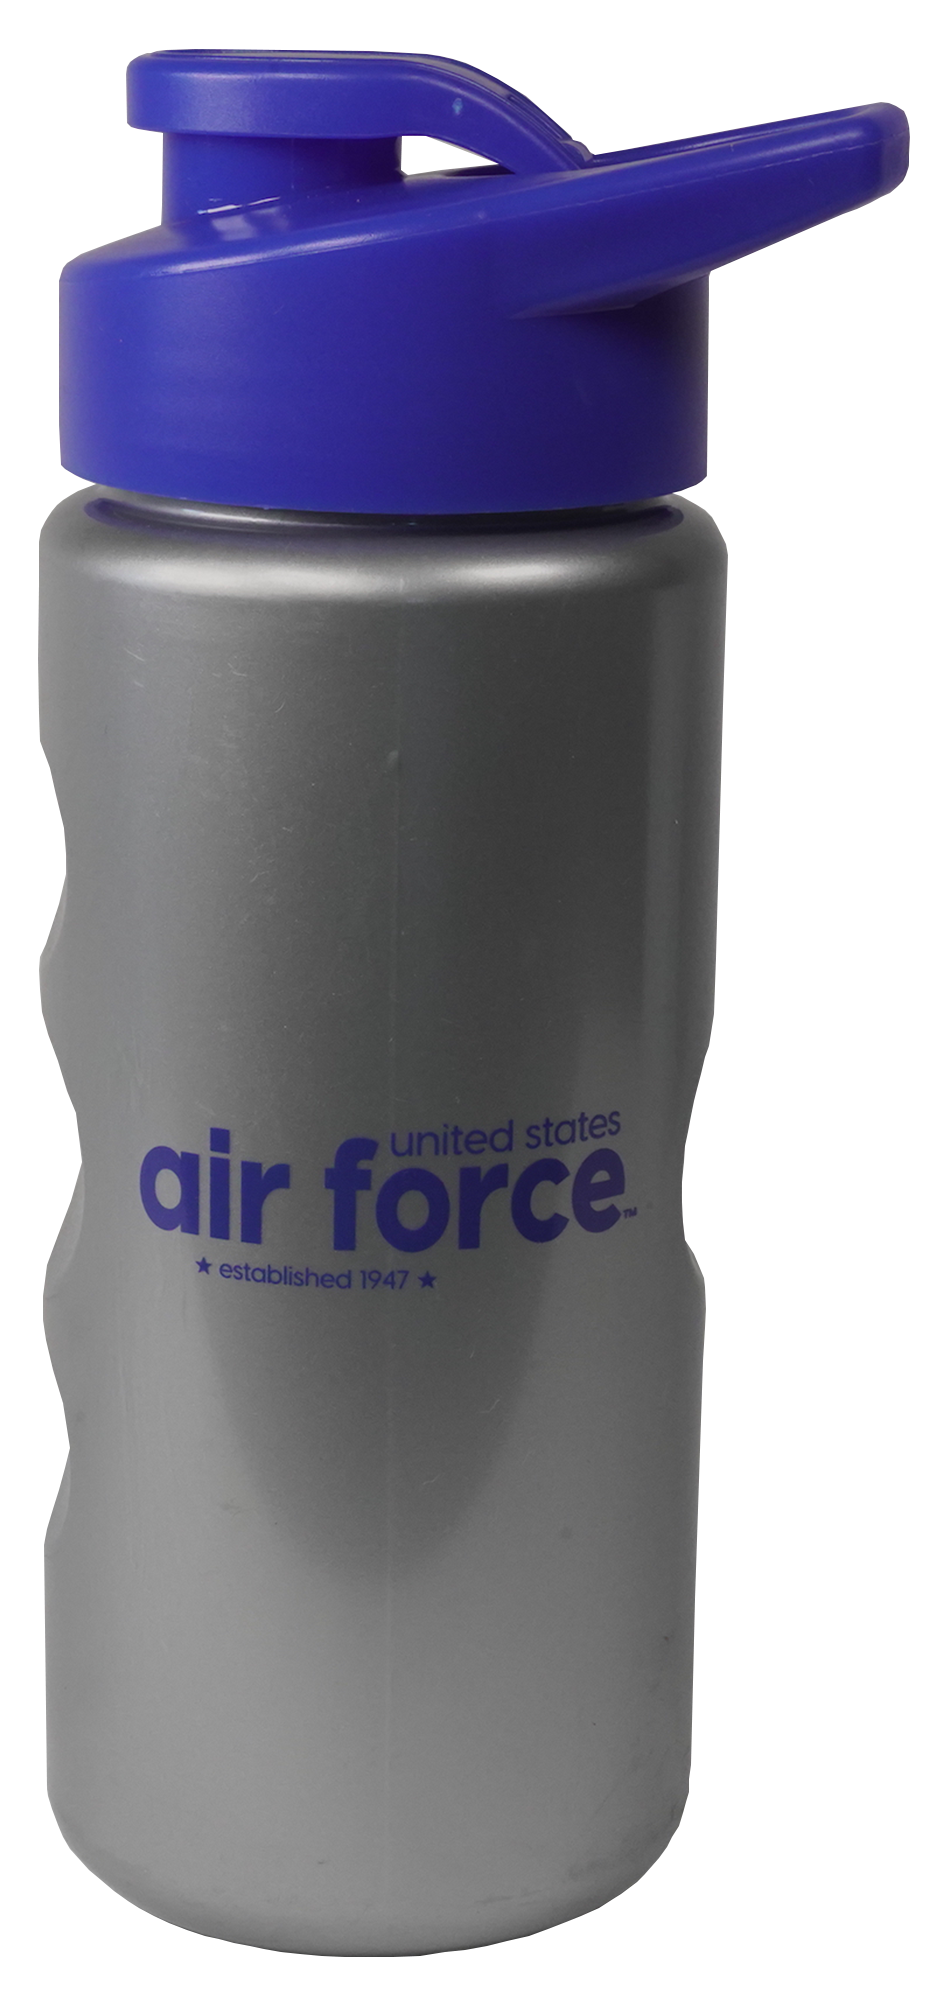 United States Air Force on 22 oz. Plastic Bottle